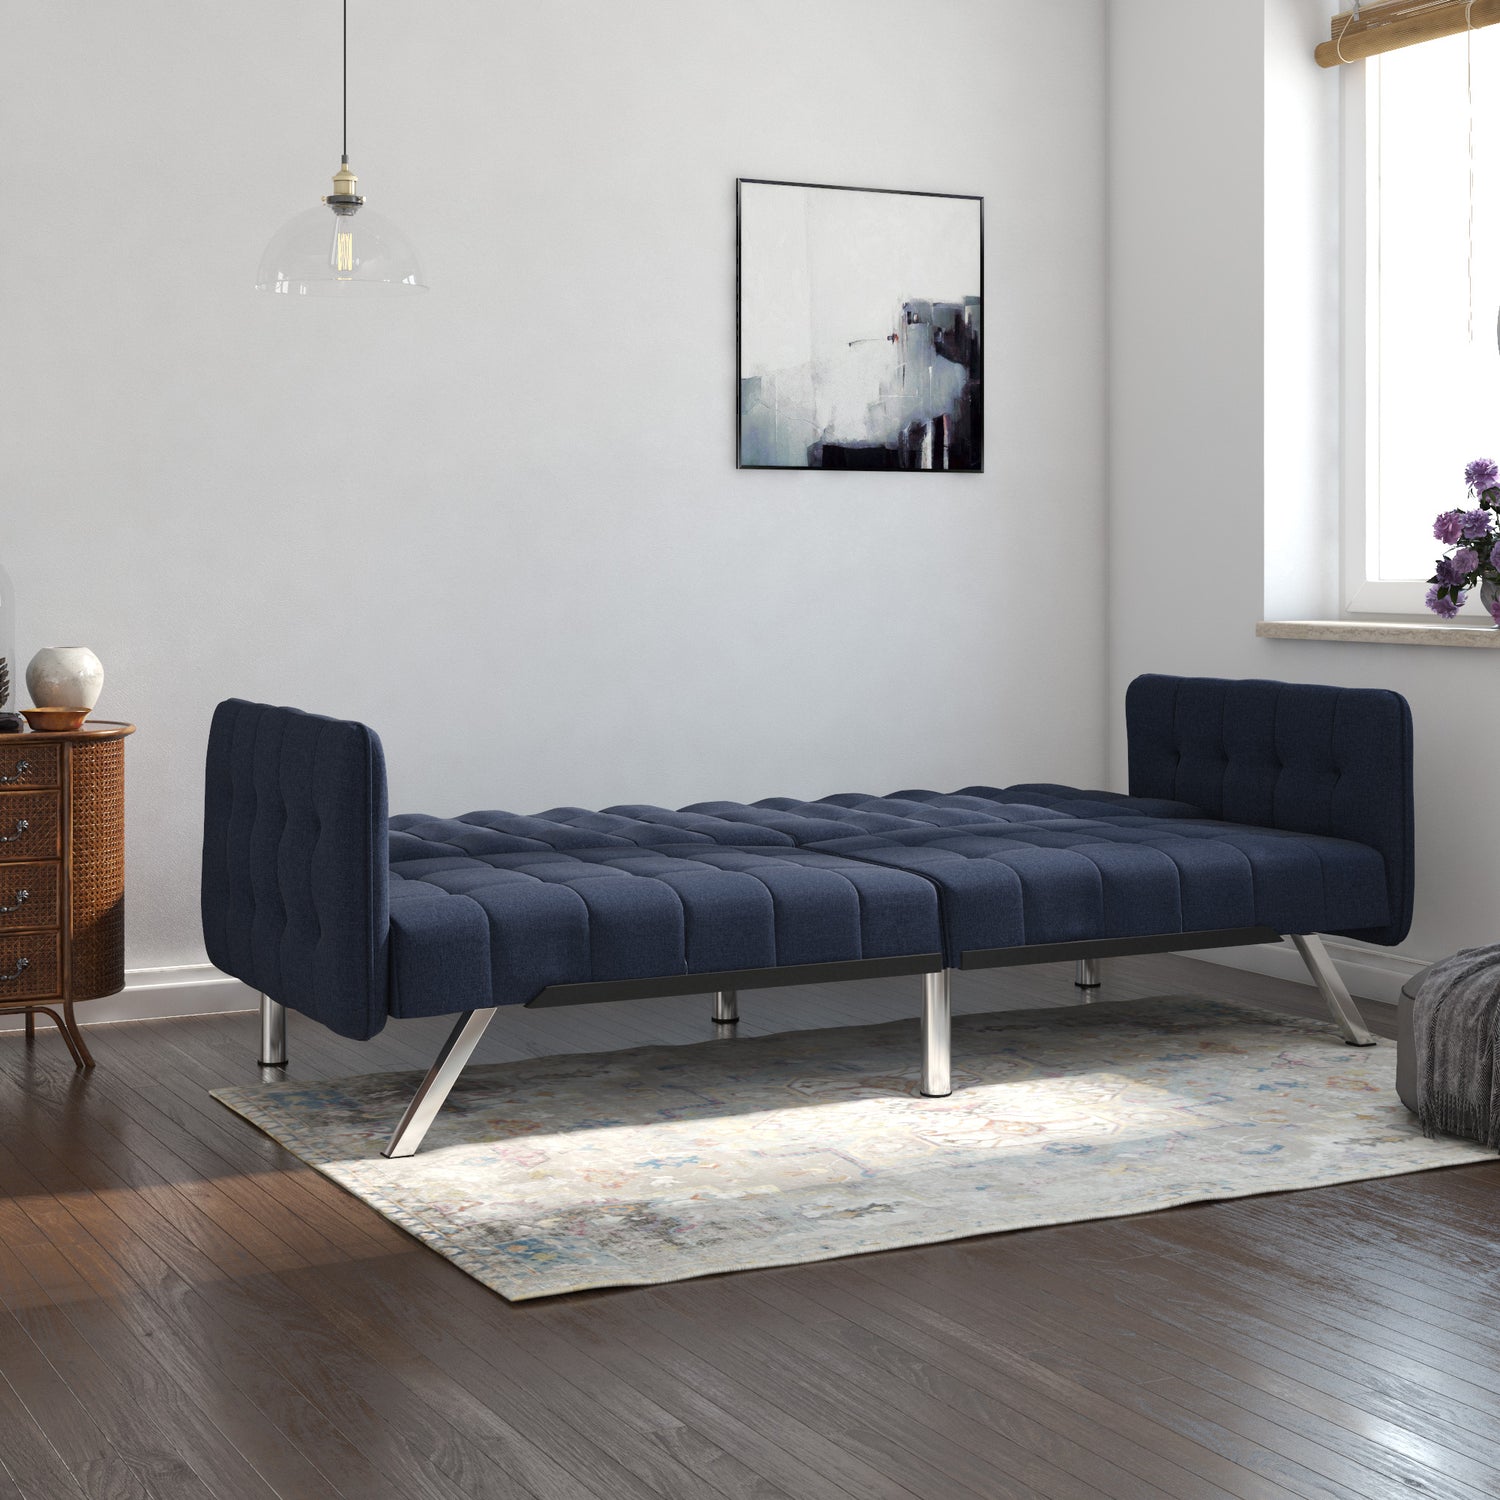 Dorel Home Emily Clic Clac Convertible Sofa Bed As A Bed-Better Bed Company 